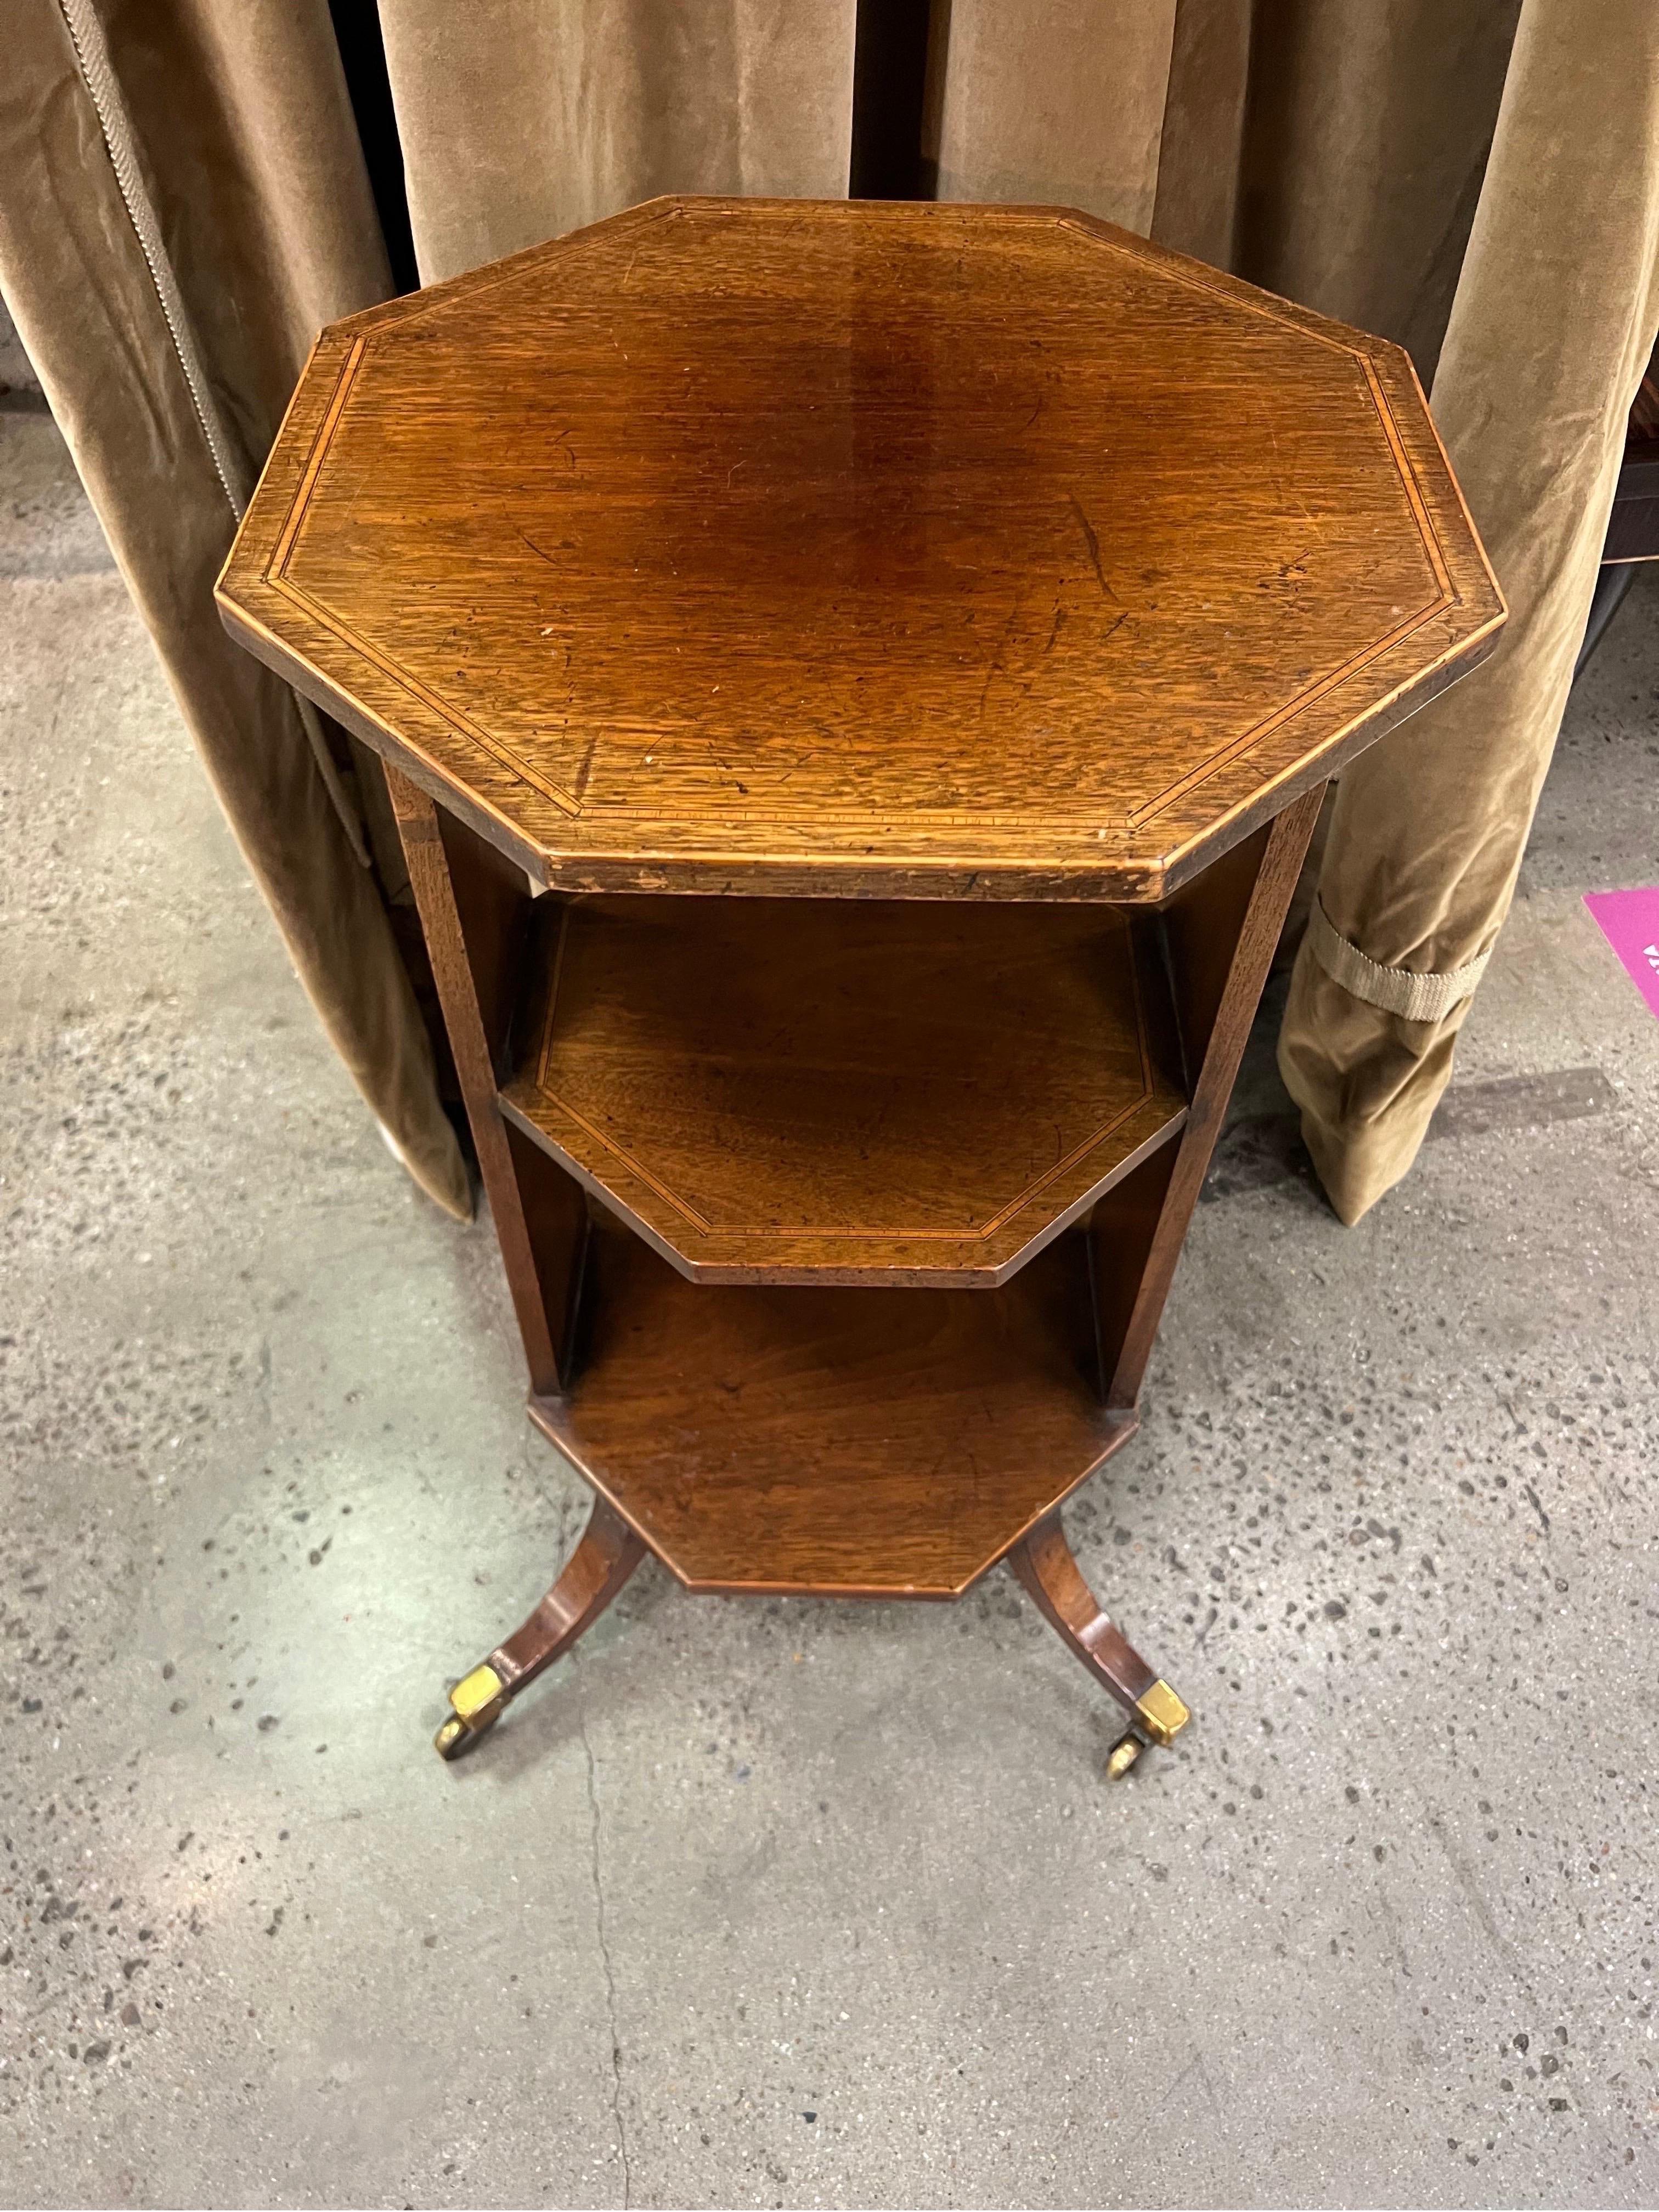 19th Century English Regency Inlaid Mahogany Side Table For Sale 2